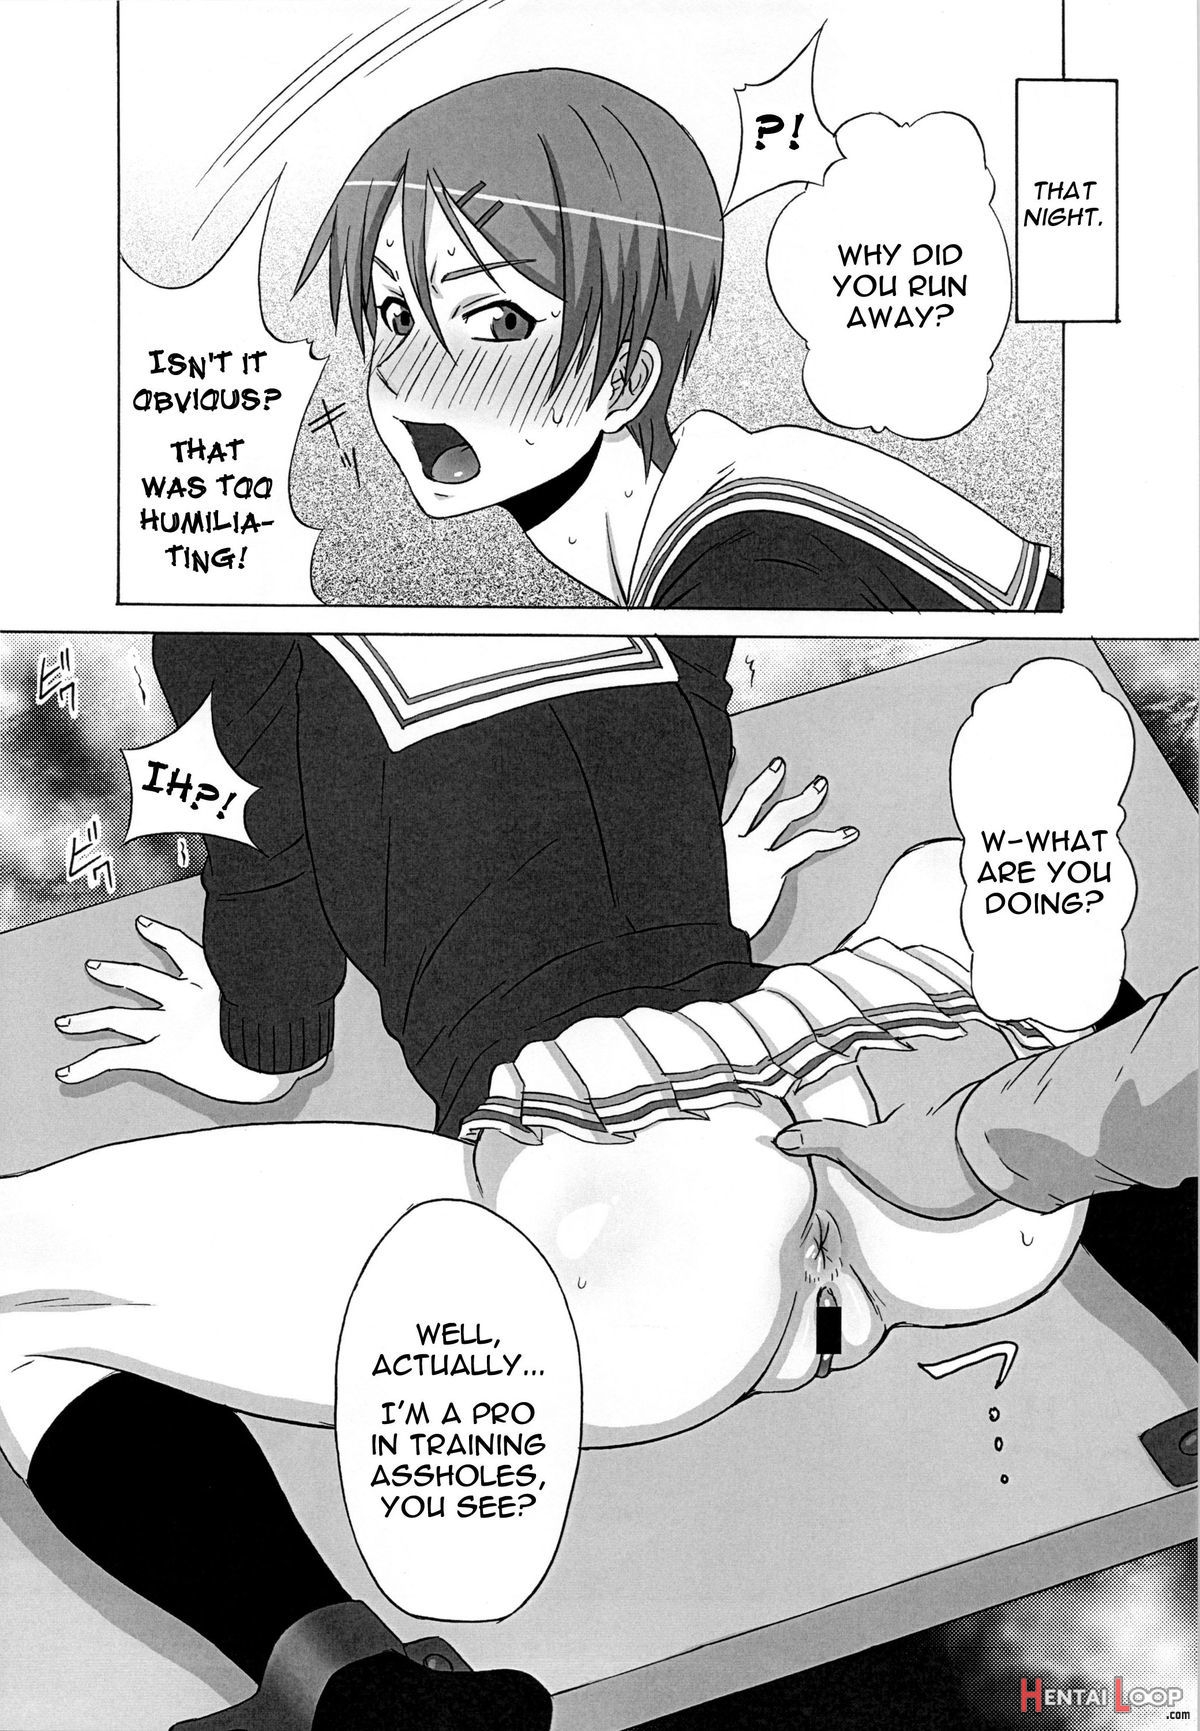 I Wanna Control Riko And Make Her Do Lots Of Humiliating Things. page 7